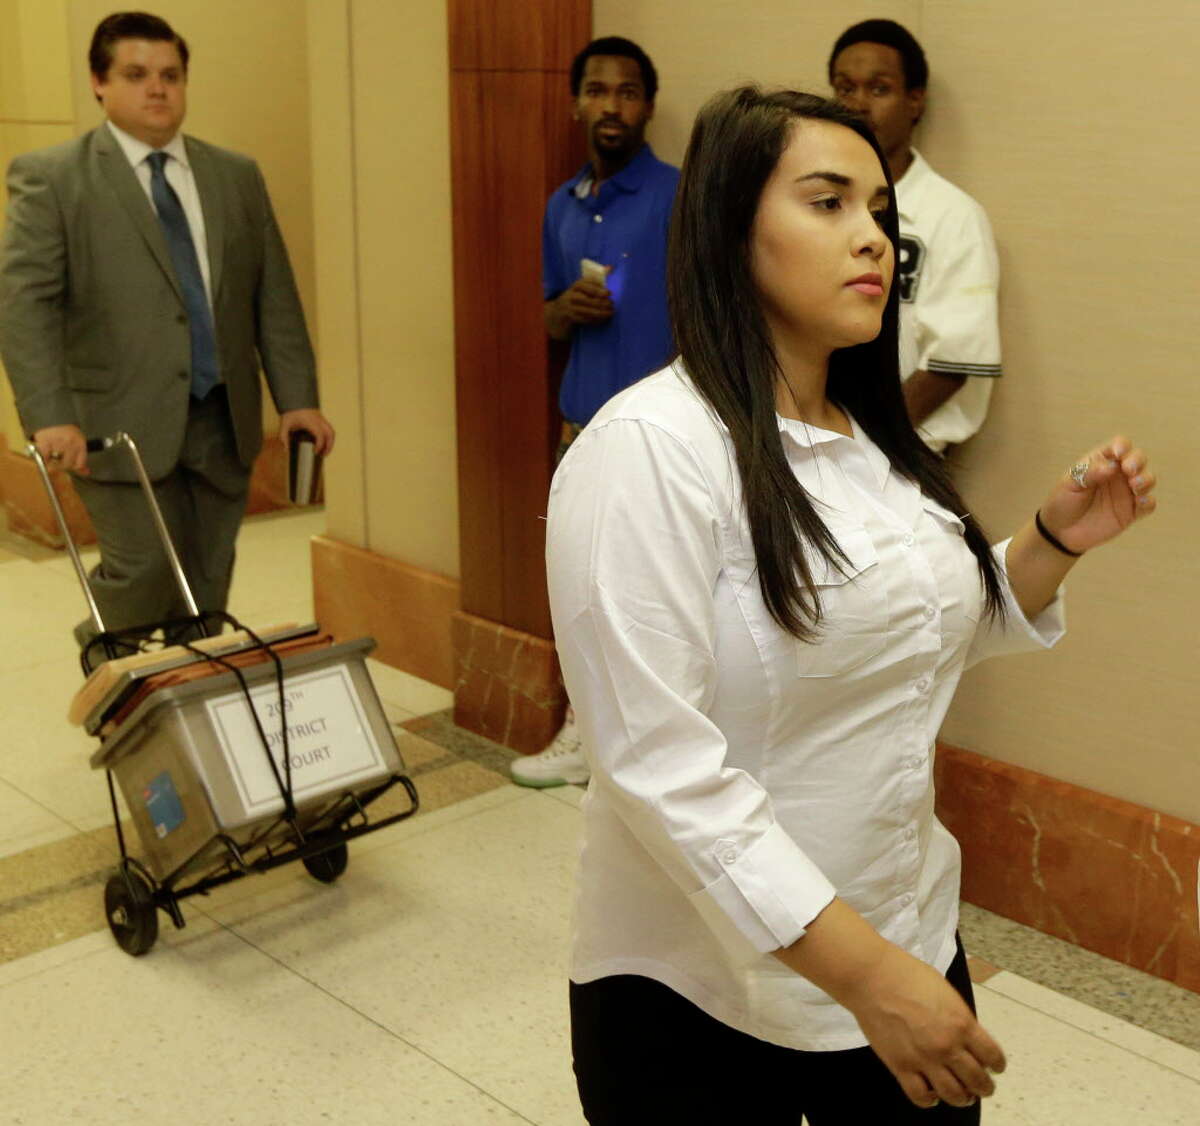 Alexandria Vera, 24, a former Aldine ISD teacher, arrives for court Wednesday, Aug. 3, 2016, in Houston. She is accused of having a long-term sexual relationship with a 13-year-old boy. State District Judge Michael McSpadden rejected a request from prosecutors that Vera's bail be revoked for a curfew violation. Vera is free on a $100,000 bail but has to wear a GPS ankle monitor, stay away from schools and have no contact with the teen who allegedly impregnated her.